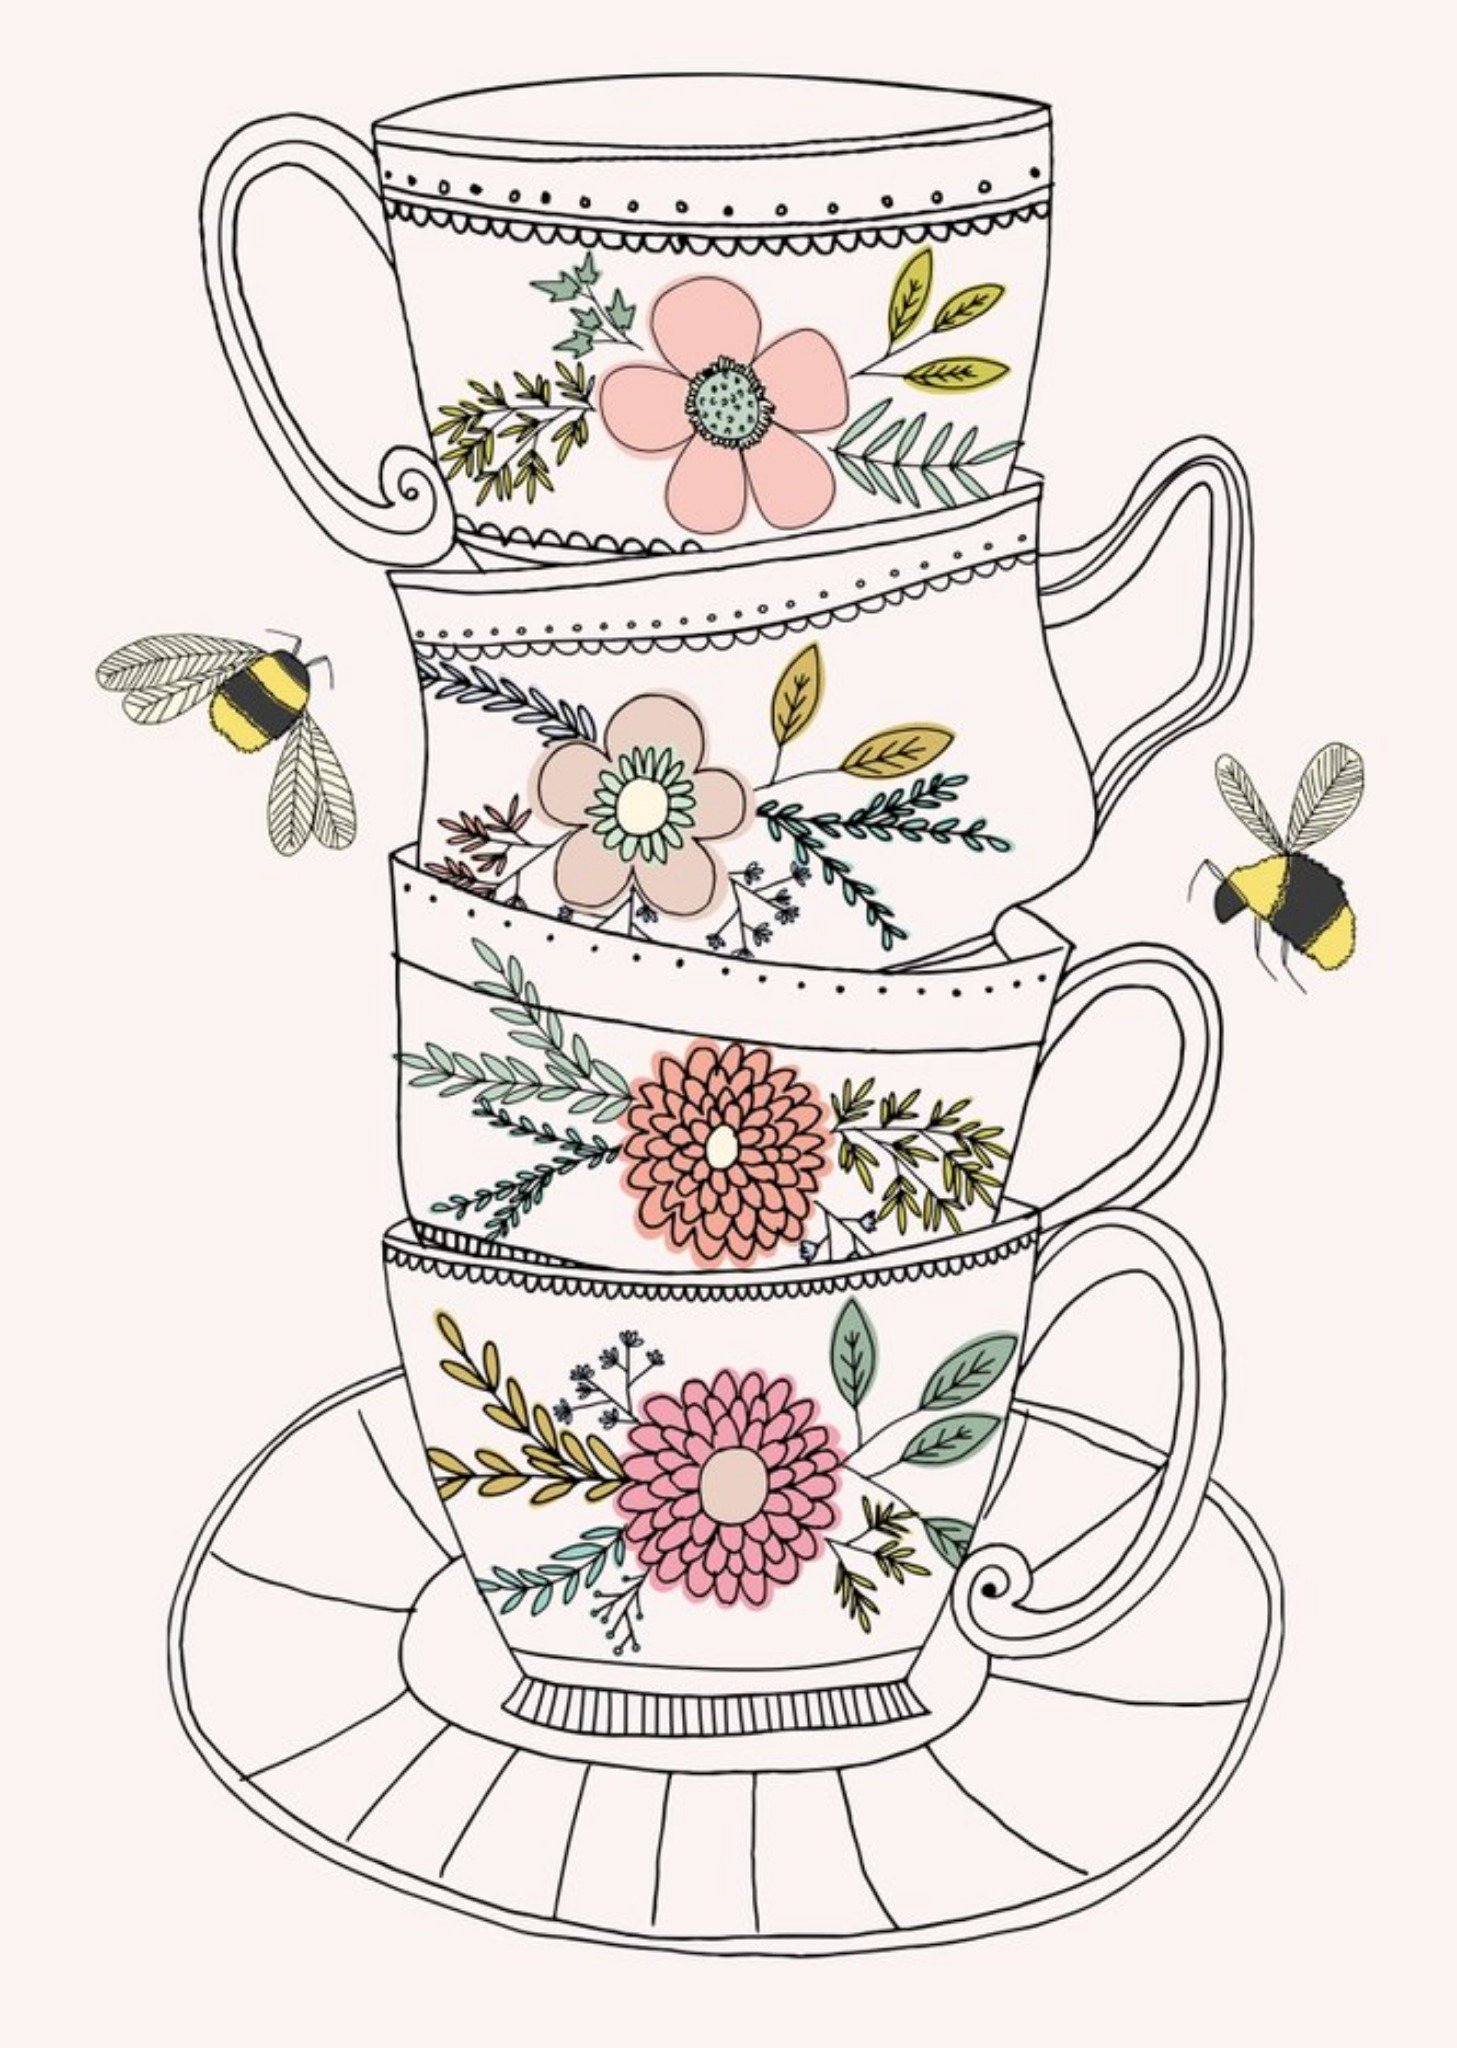 Moonpig Pretty Flowers And Bees Illustrated Tea Cups Postcard